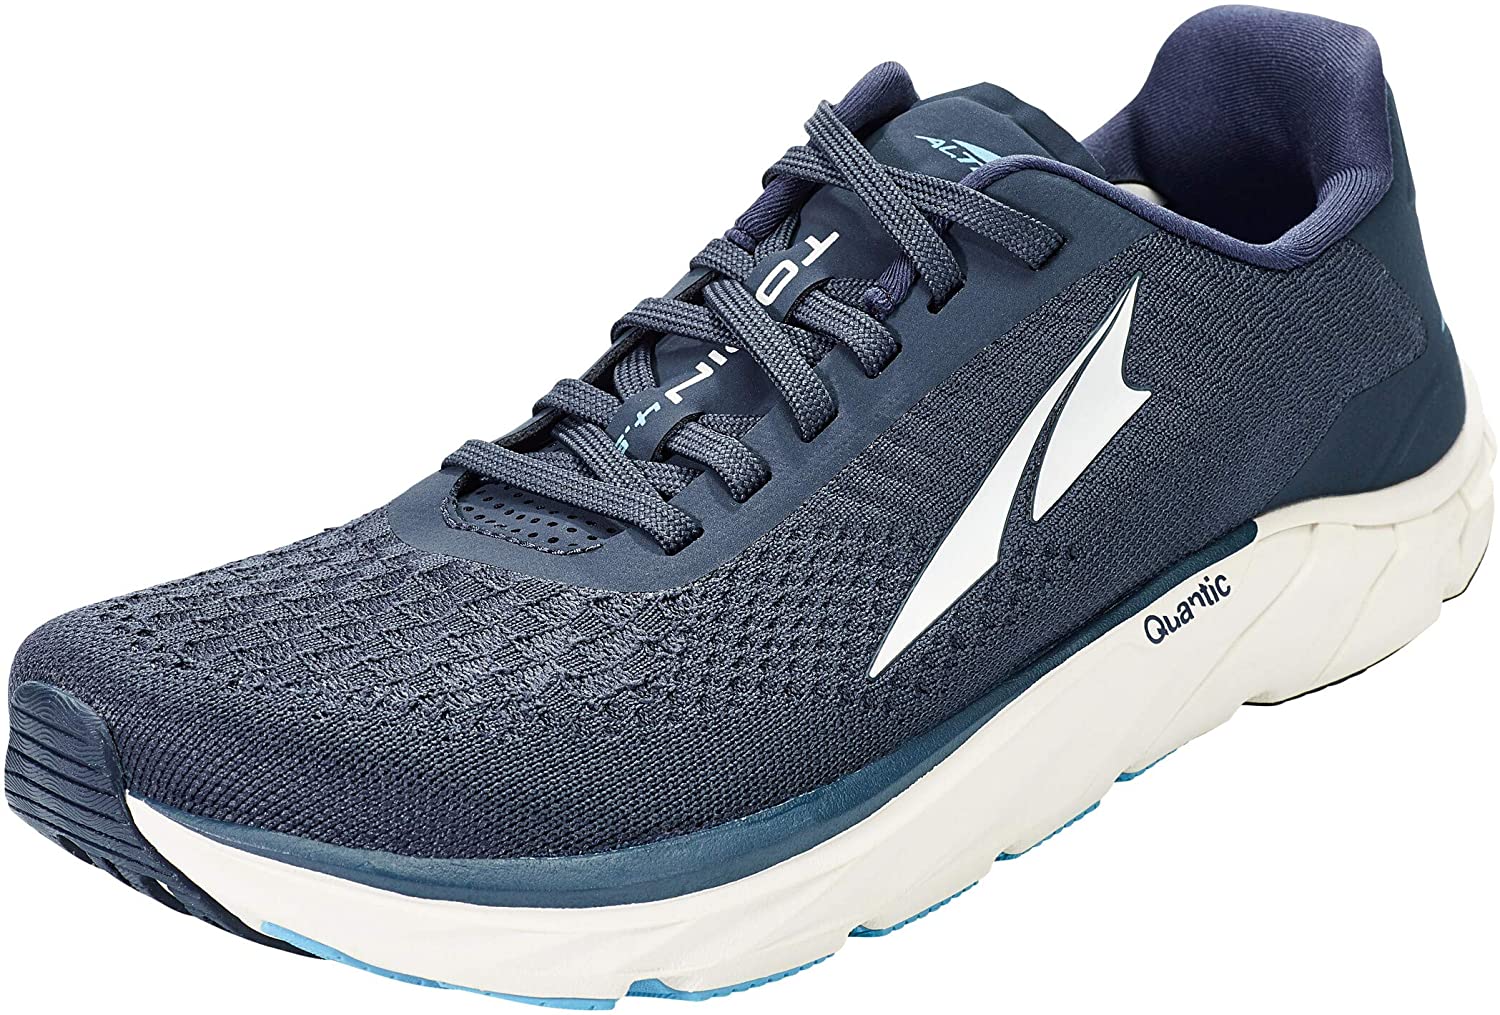 Altra Men's Torin 4.5 Plush Road Running Shoe in Majolica Blue from the side